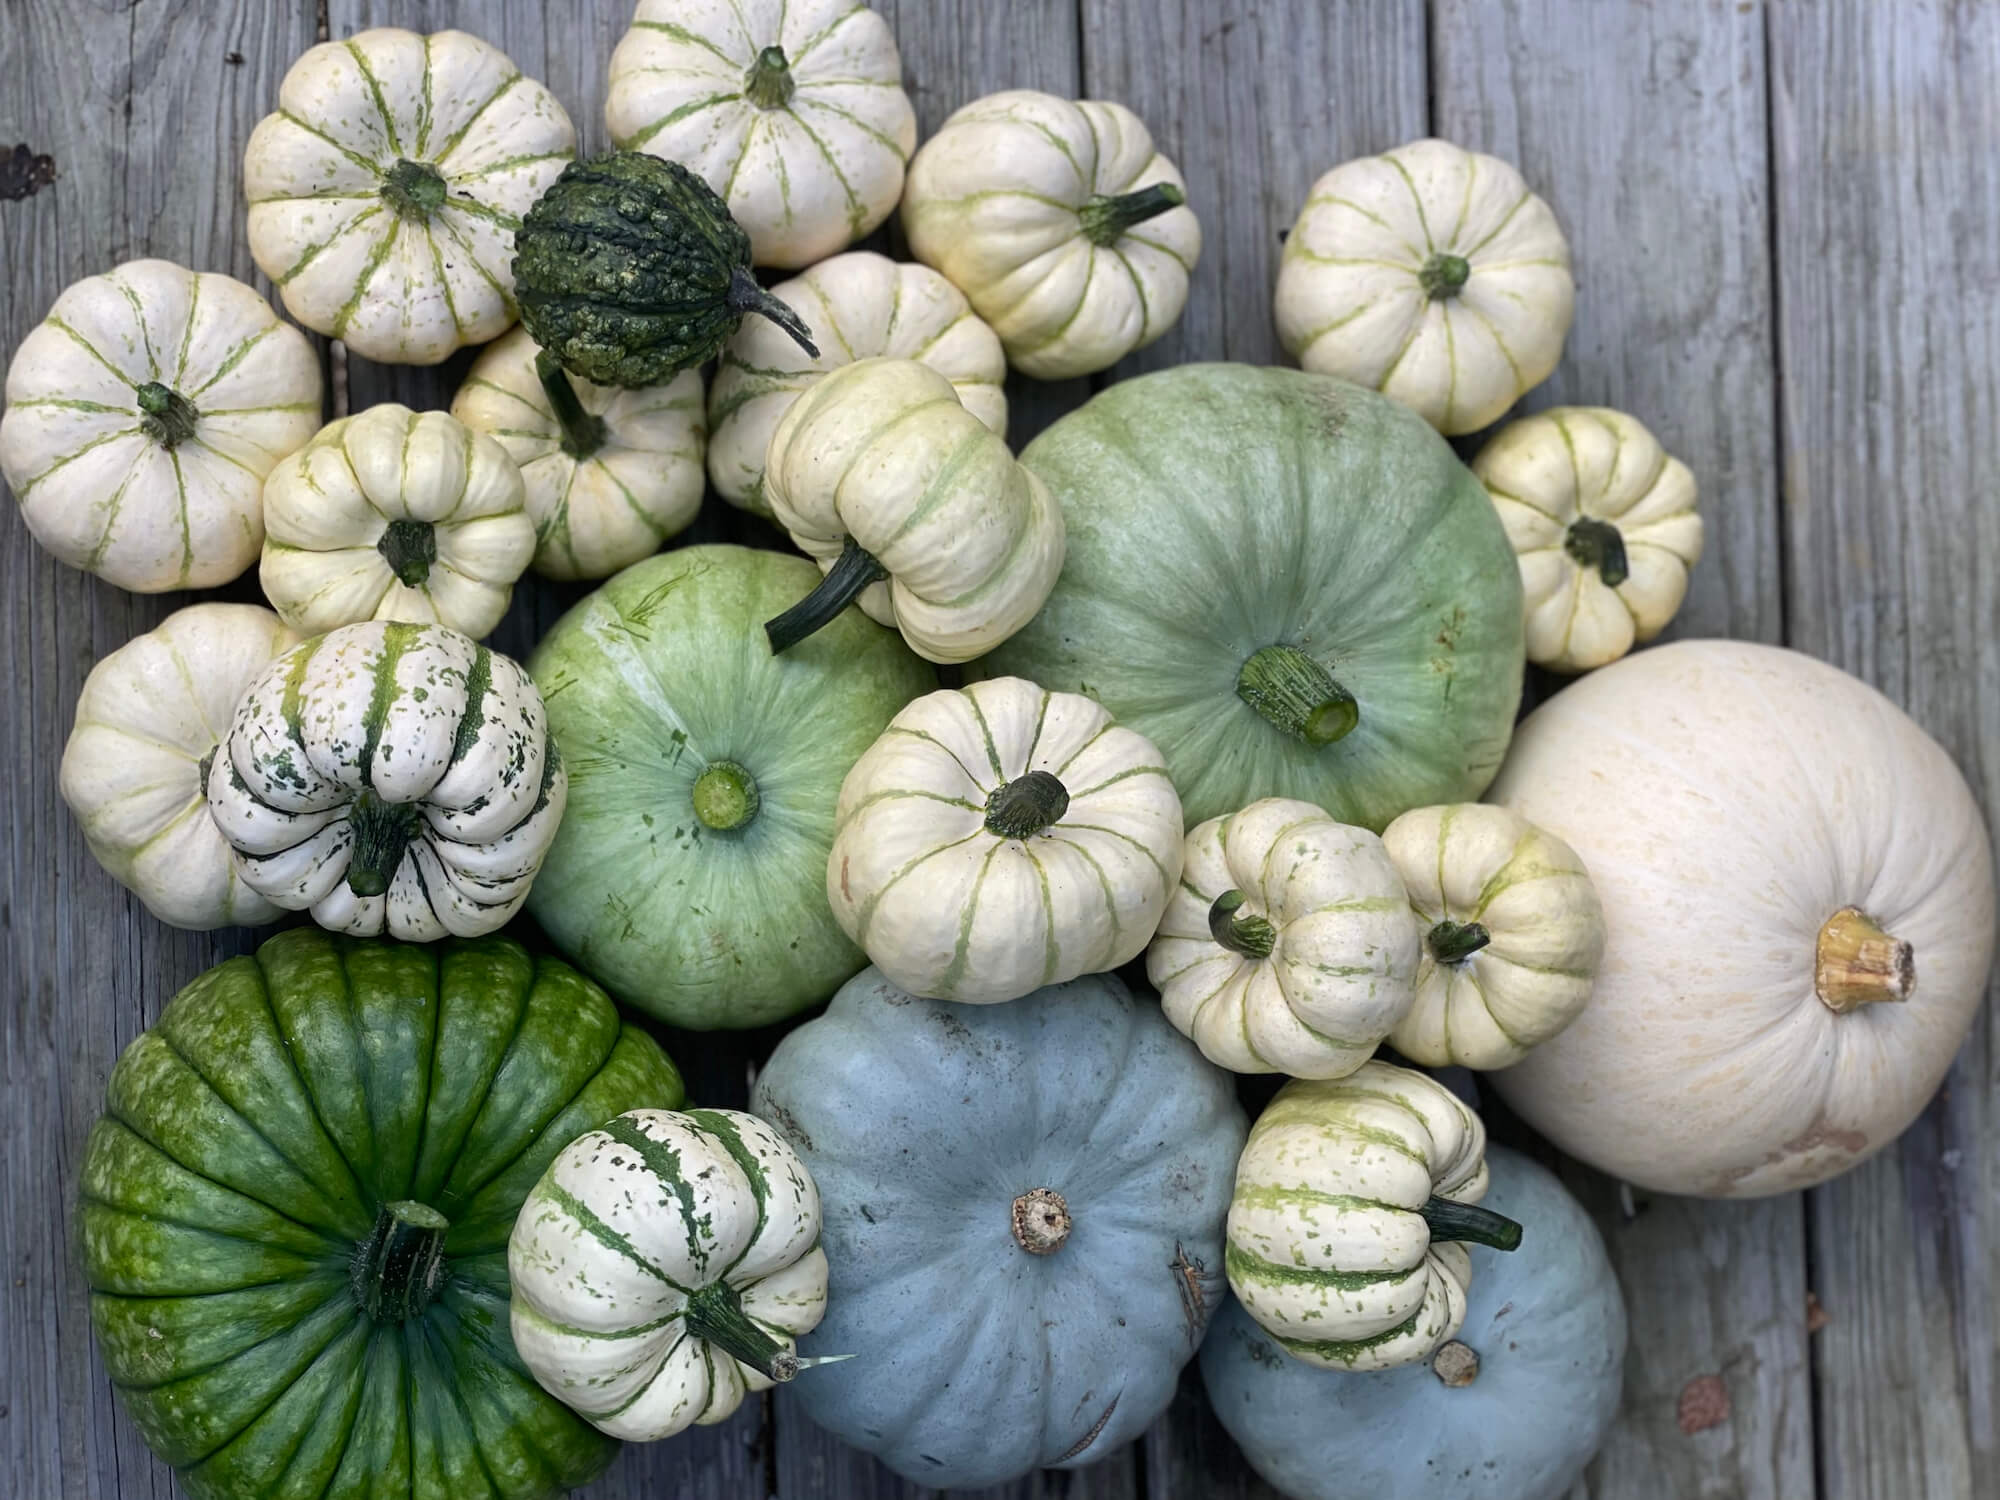 Gourds and pumpkins in green, white and grey